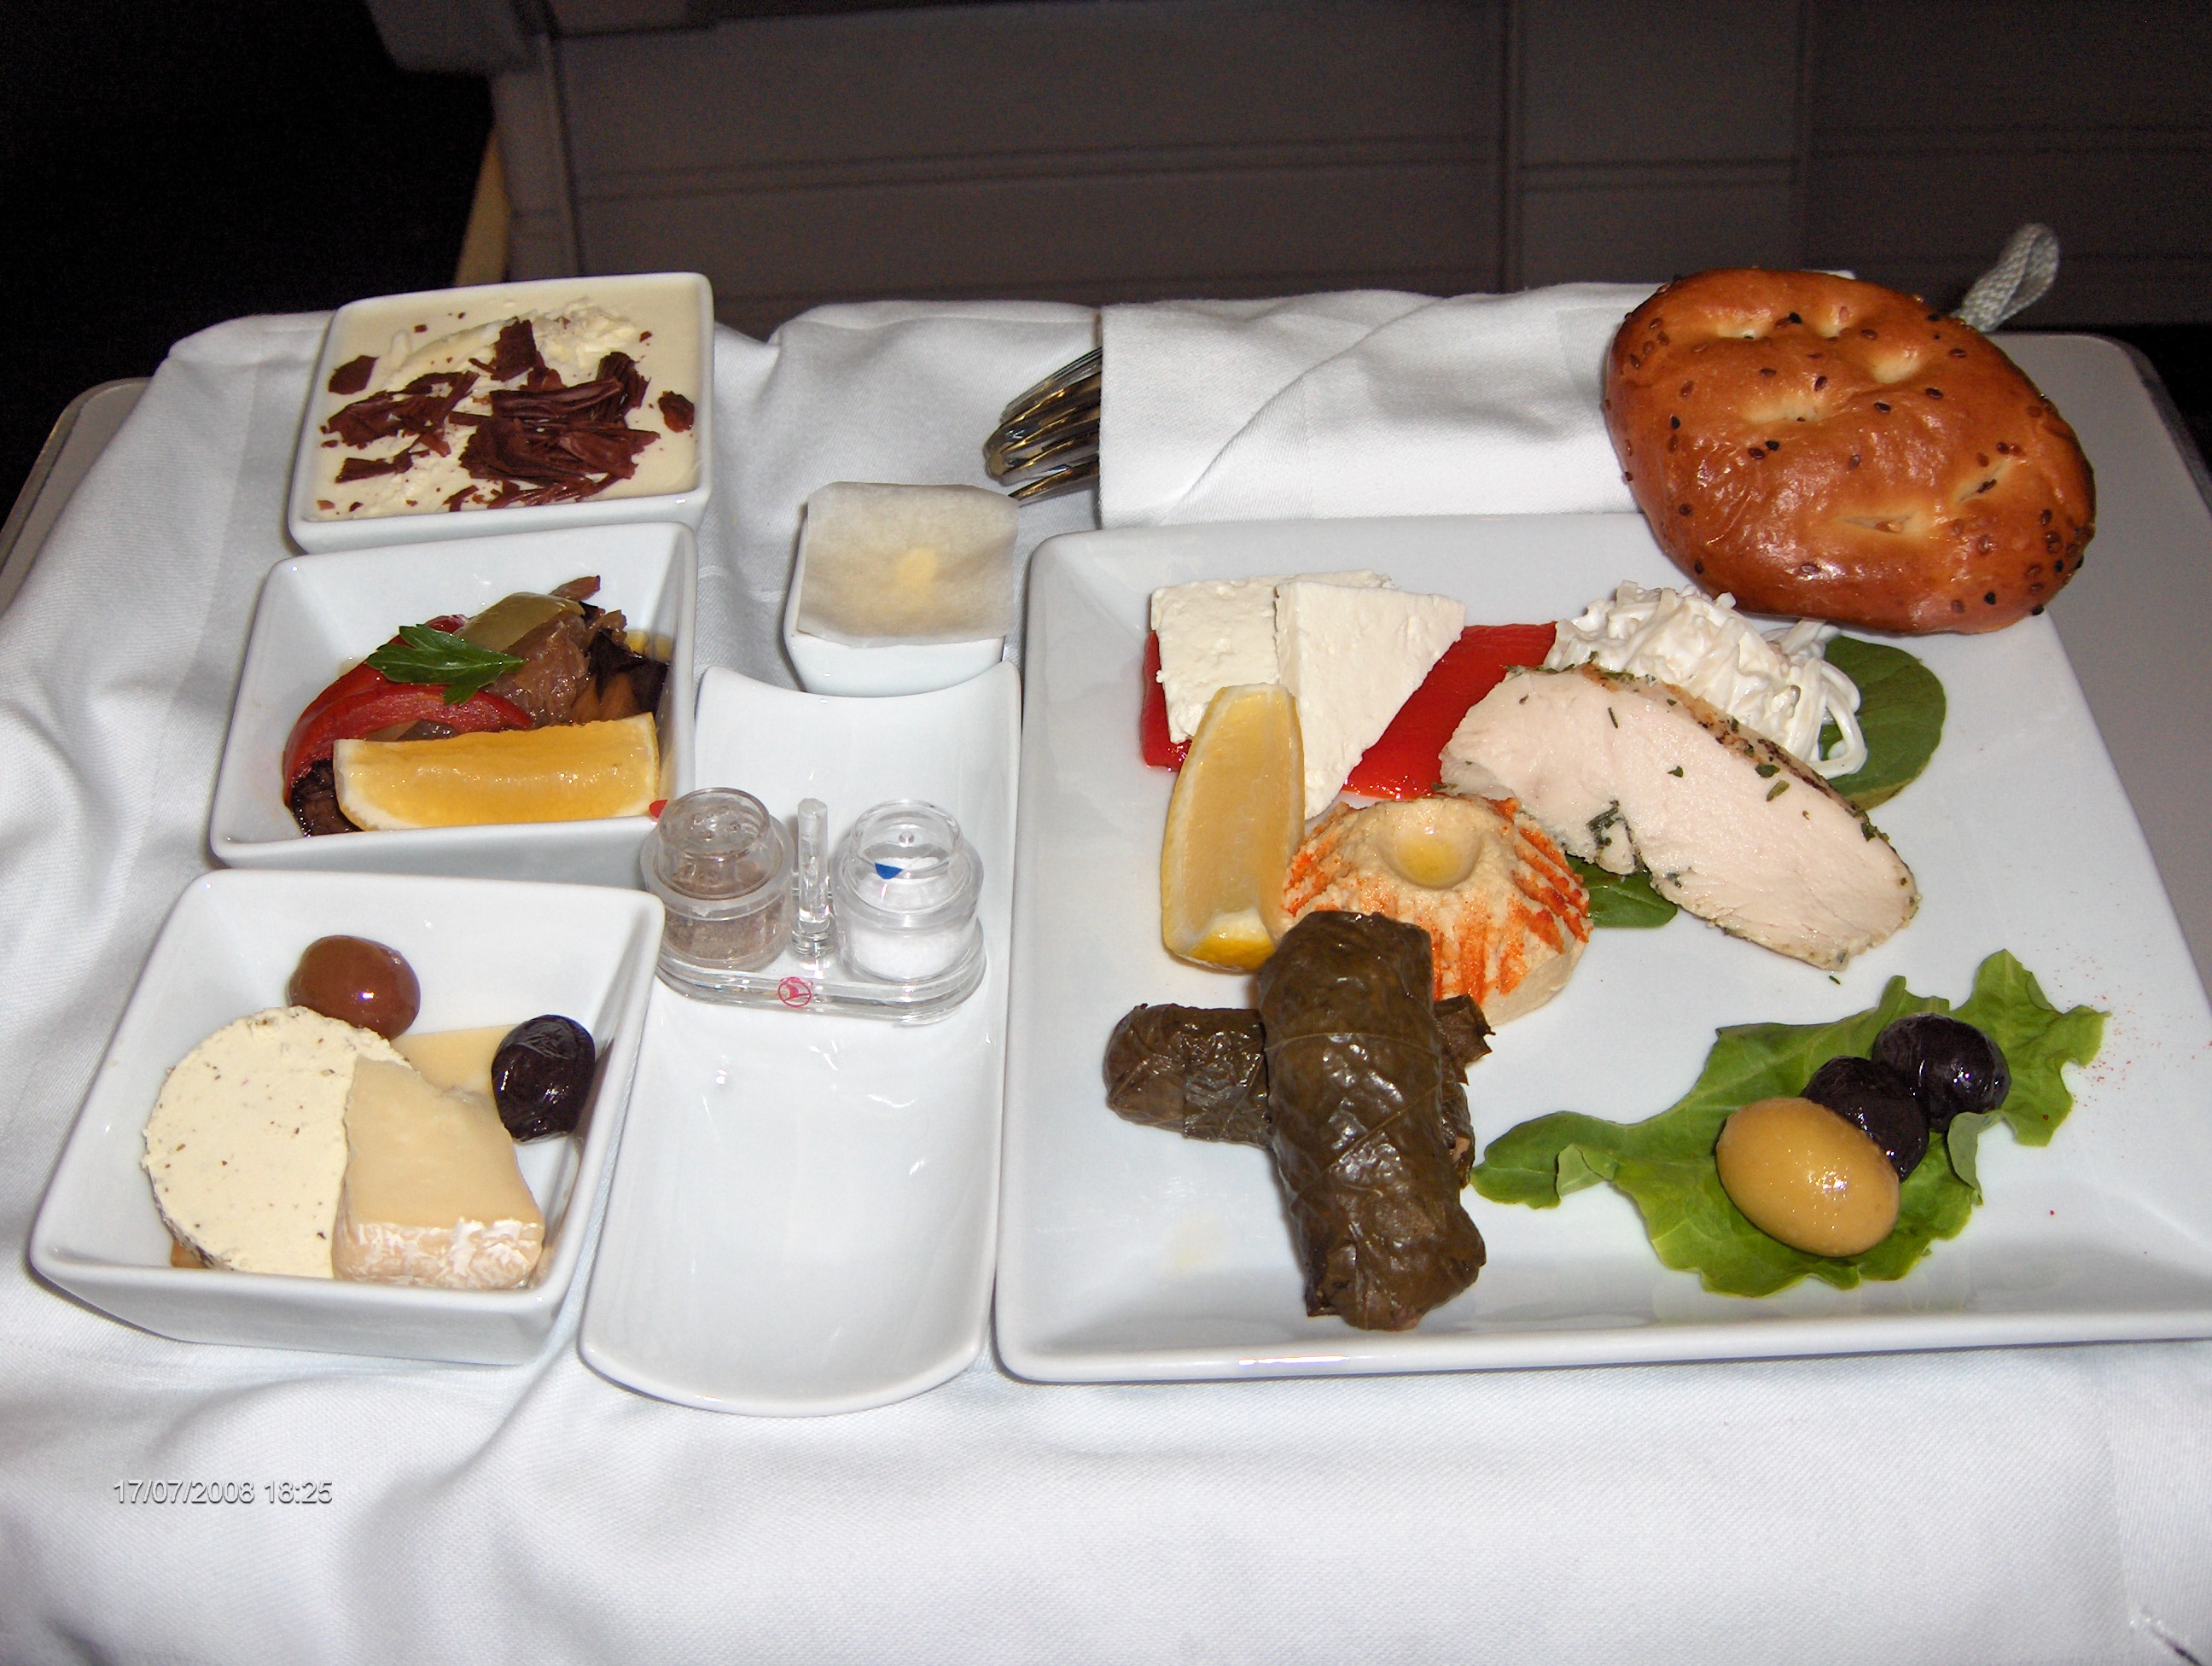 Turkish Airlines Inflight Meal (Istanbul-New York)